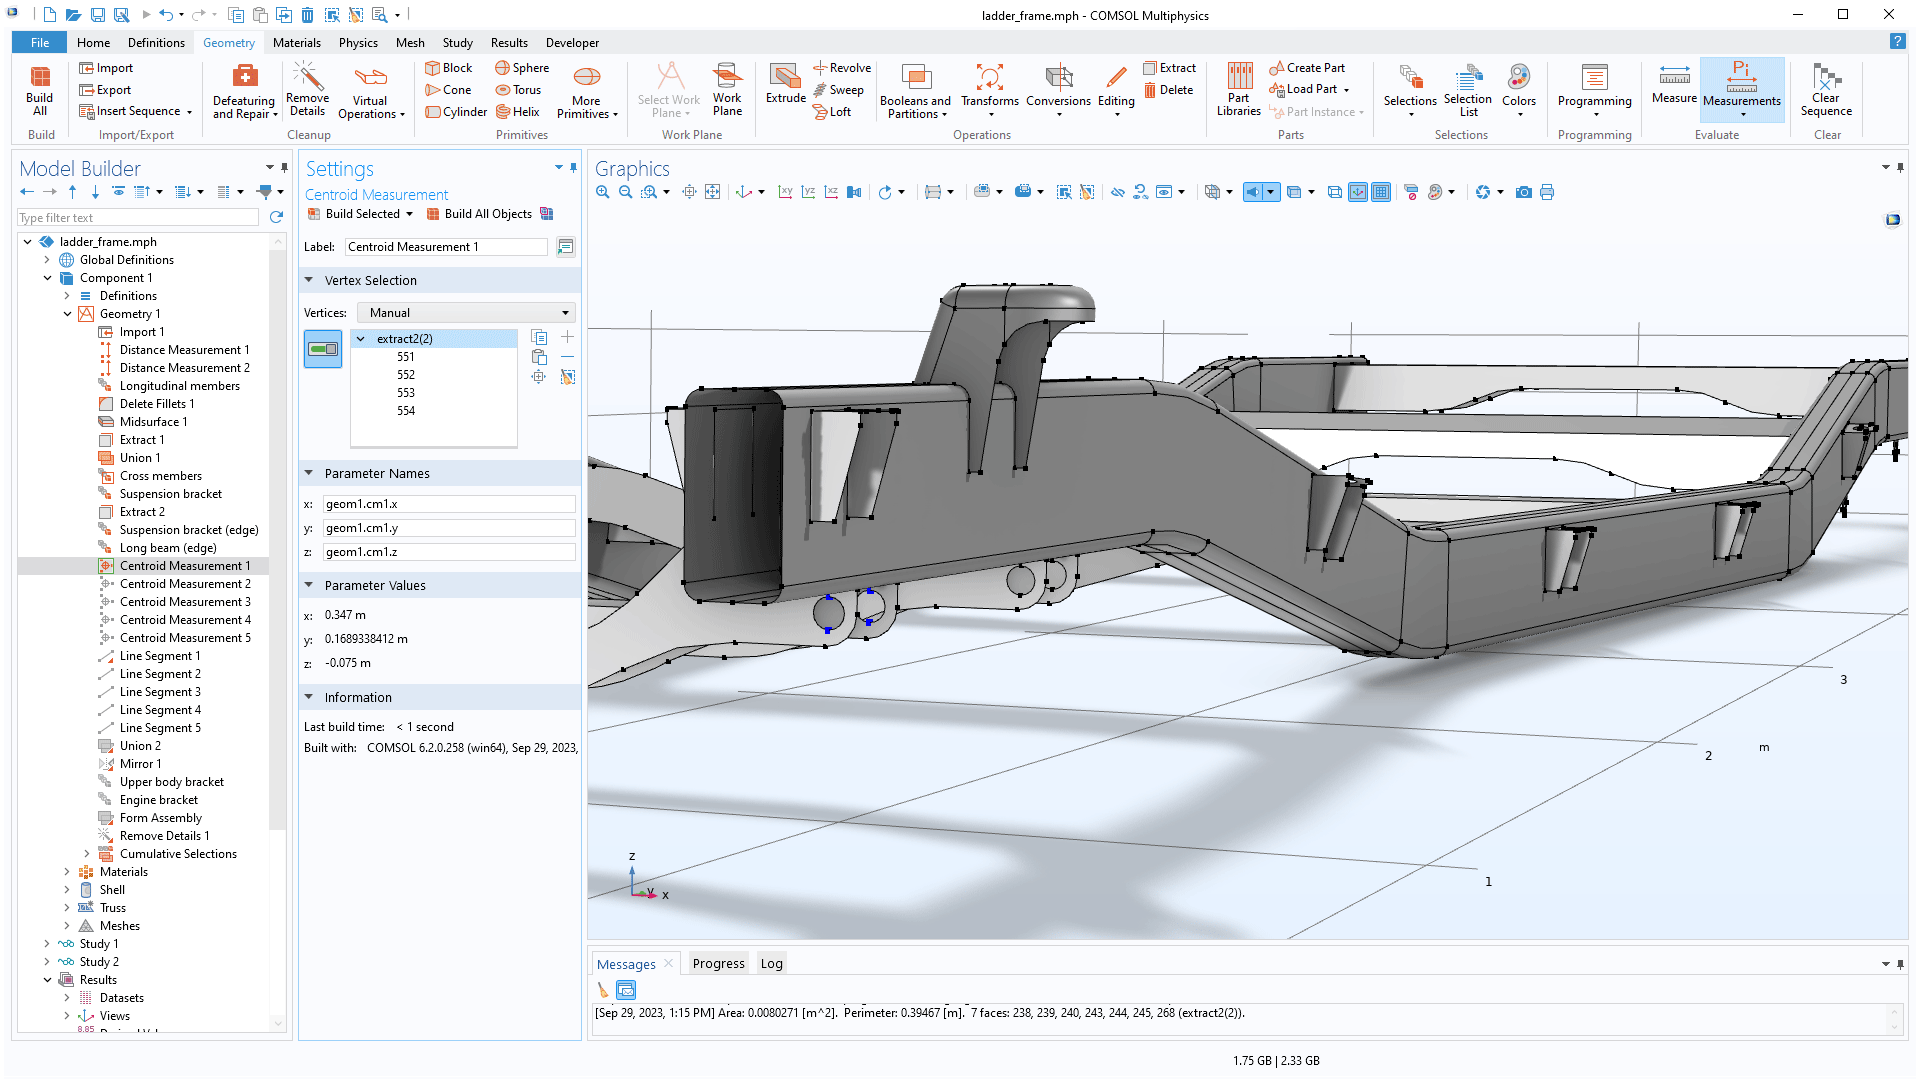 The COMSOL Multiphysics UI showing the Model Builder with the Centroid Measurement node highlighted, the corresponding Settings window, and a ladder frame model in the Graphics window.